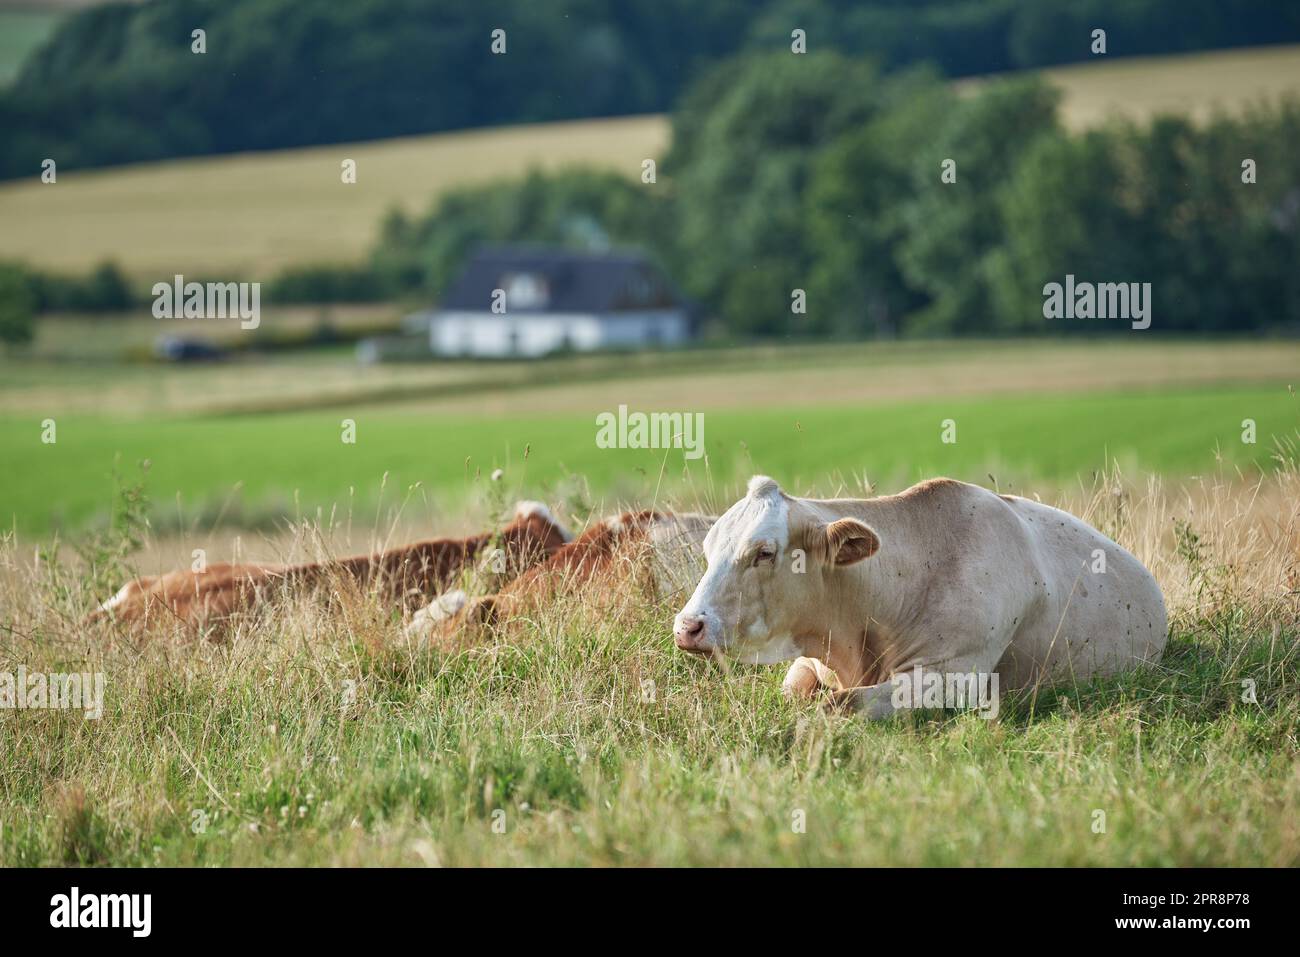 Brown and white cows lying on a field and farmland in the background with copy space. Cattle or livestock animals on a sustainable agricultural farm for dairy, beef or meat industry with copyspace Stock Photo